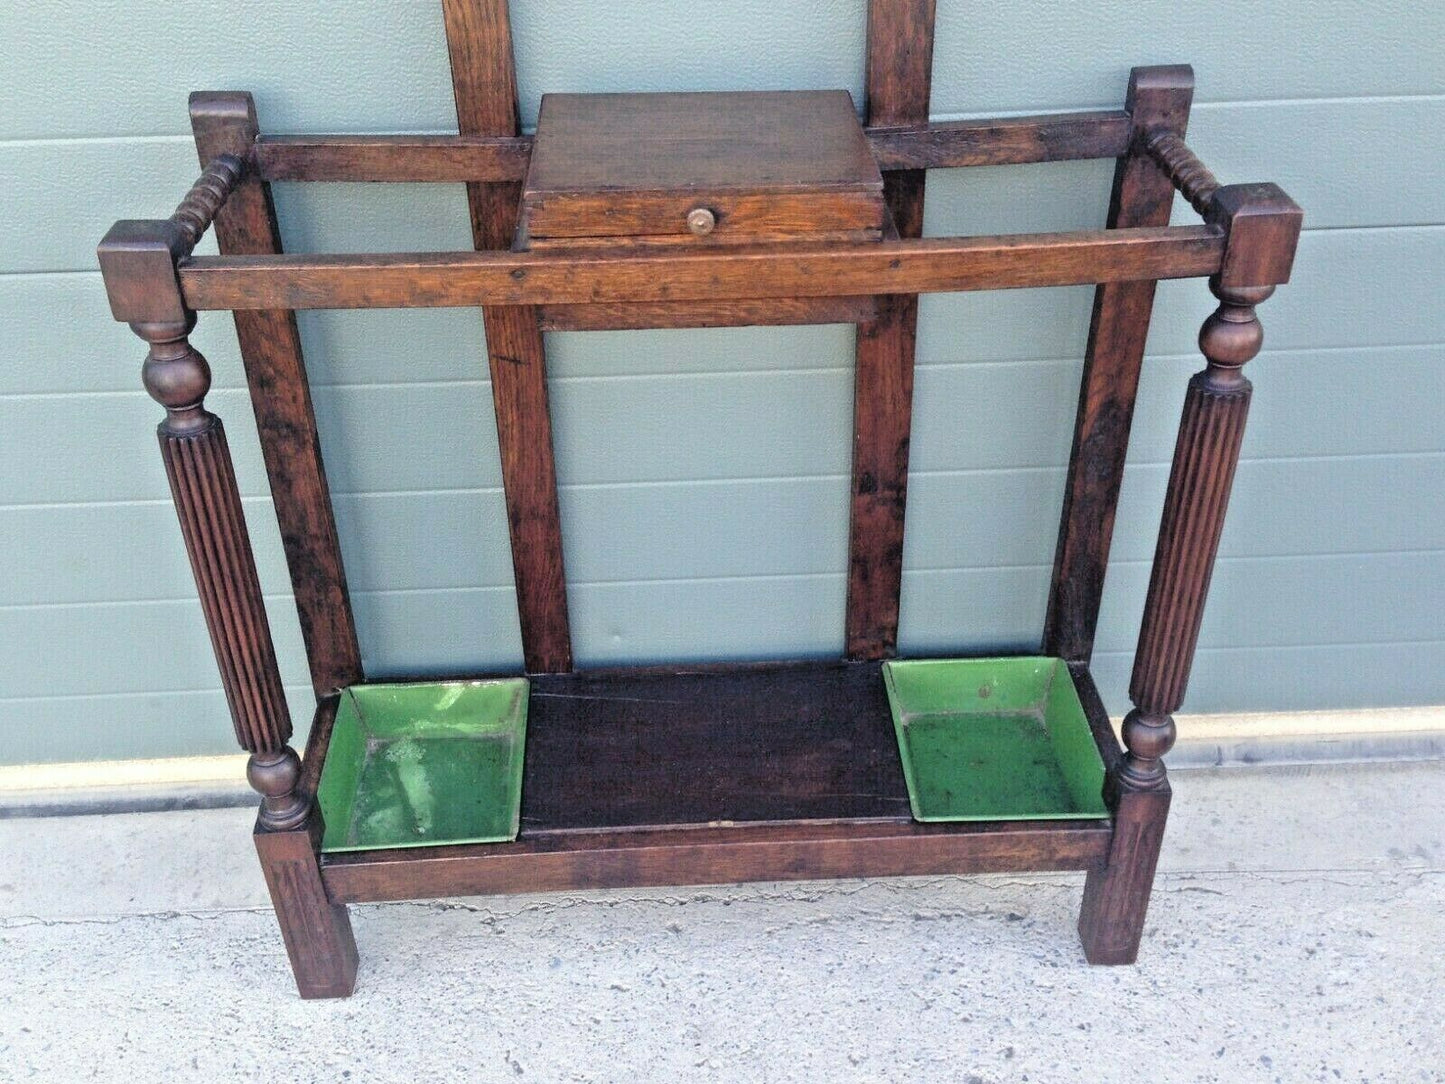 Unique Arts And Crafts Style Hall Stand / Vintage Coat Rack ( SOLD )